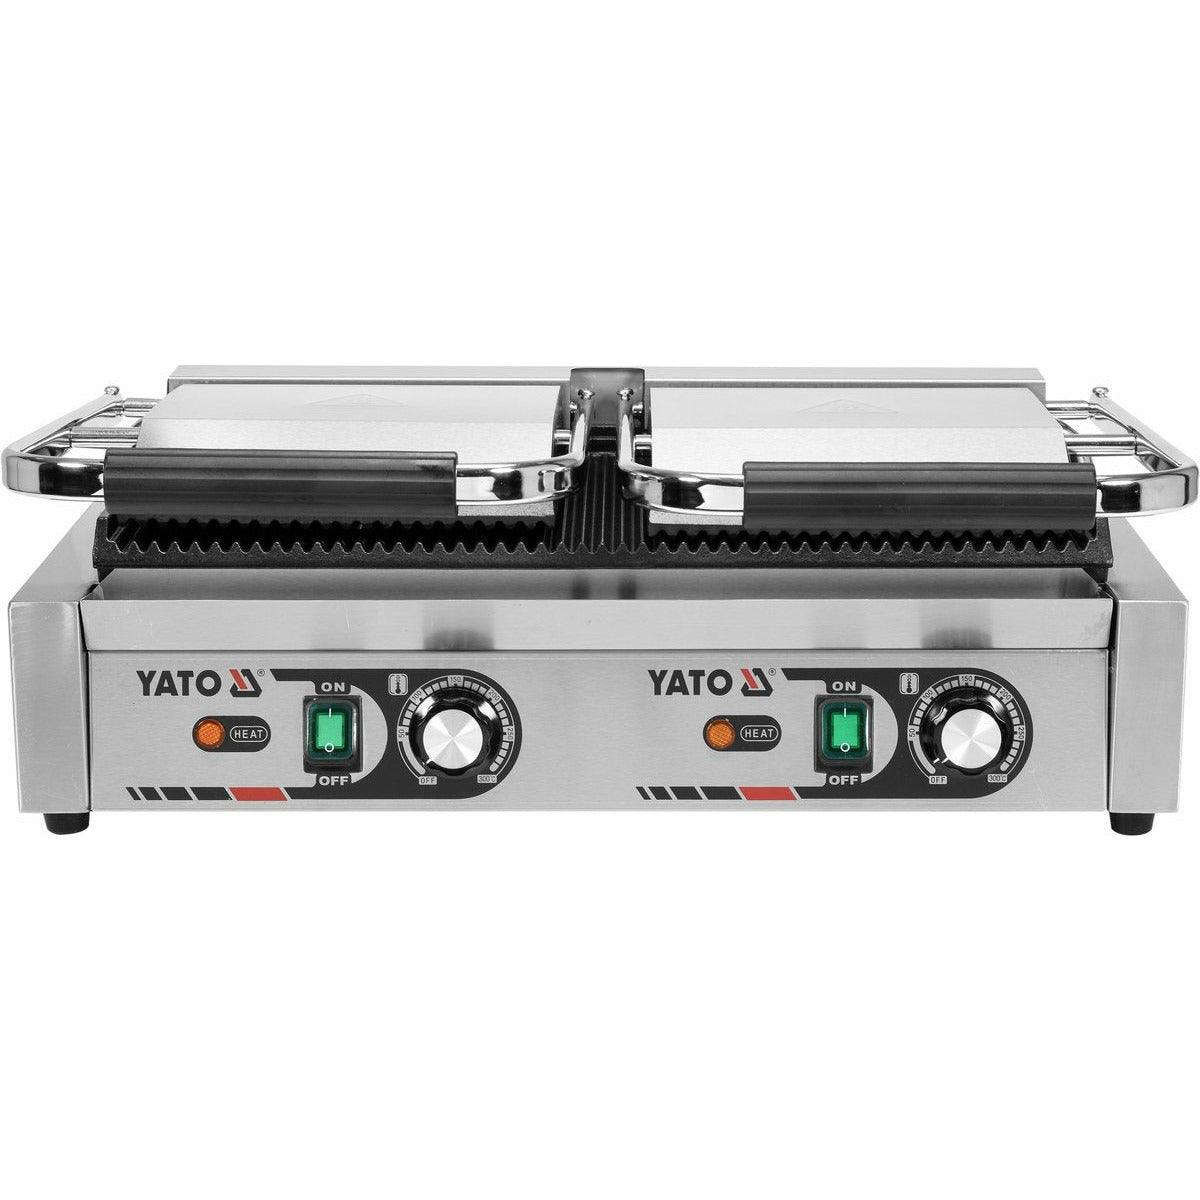 DOUBLE CONTACT GRILL FULL RIBBED 58CM, YATO - ZEP.RO